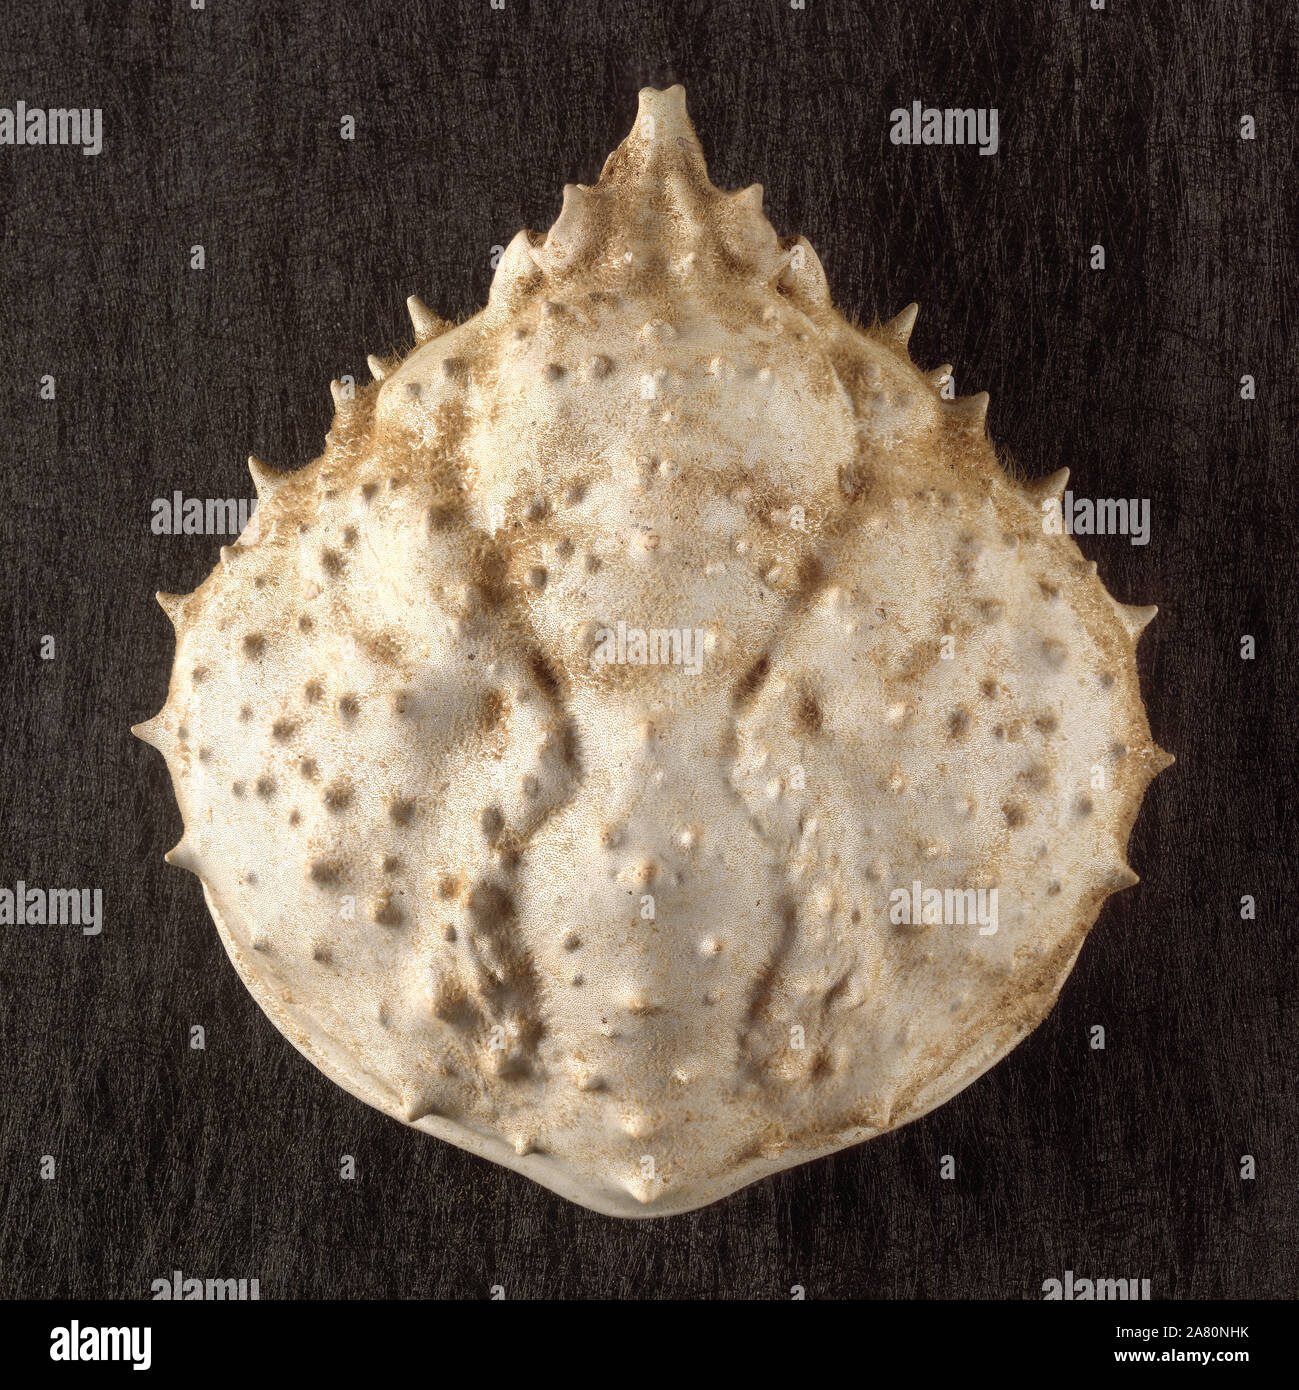 Still life of a Spider Crabs Carapace. Stock Photo